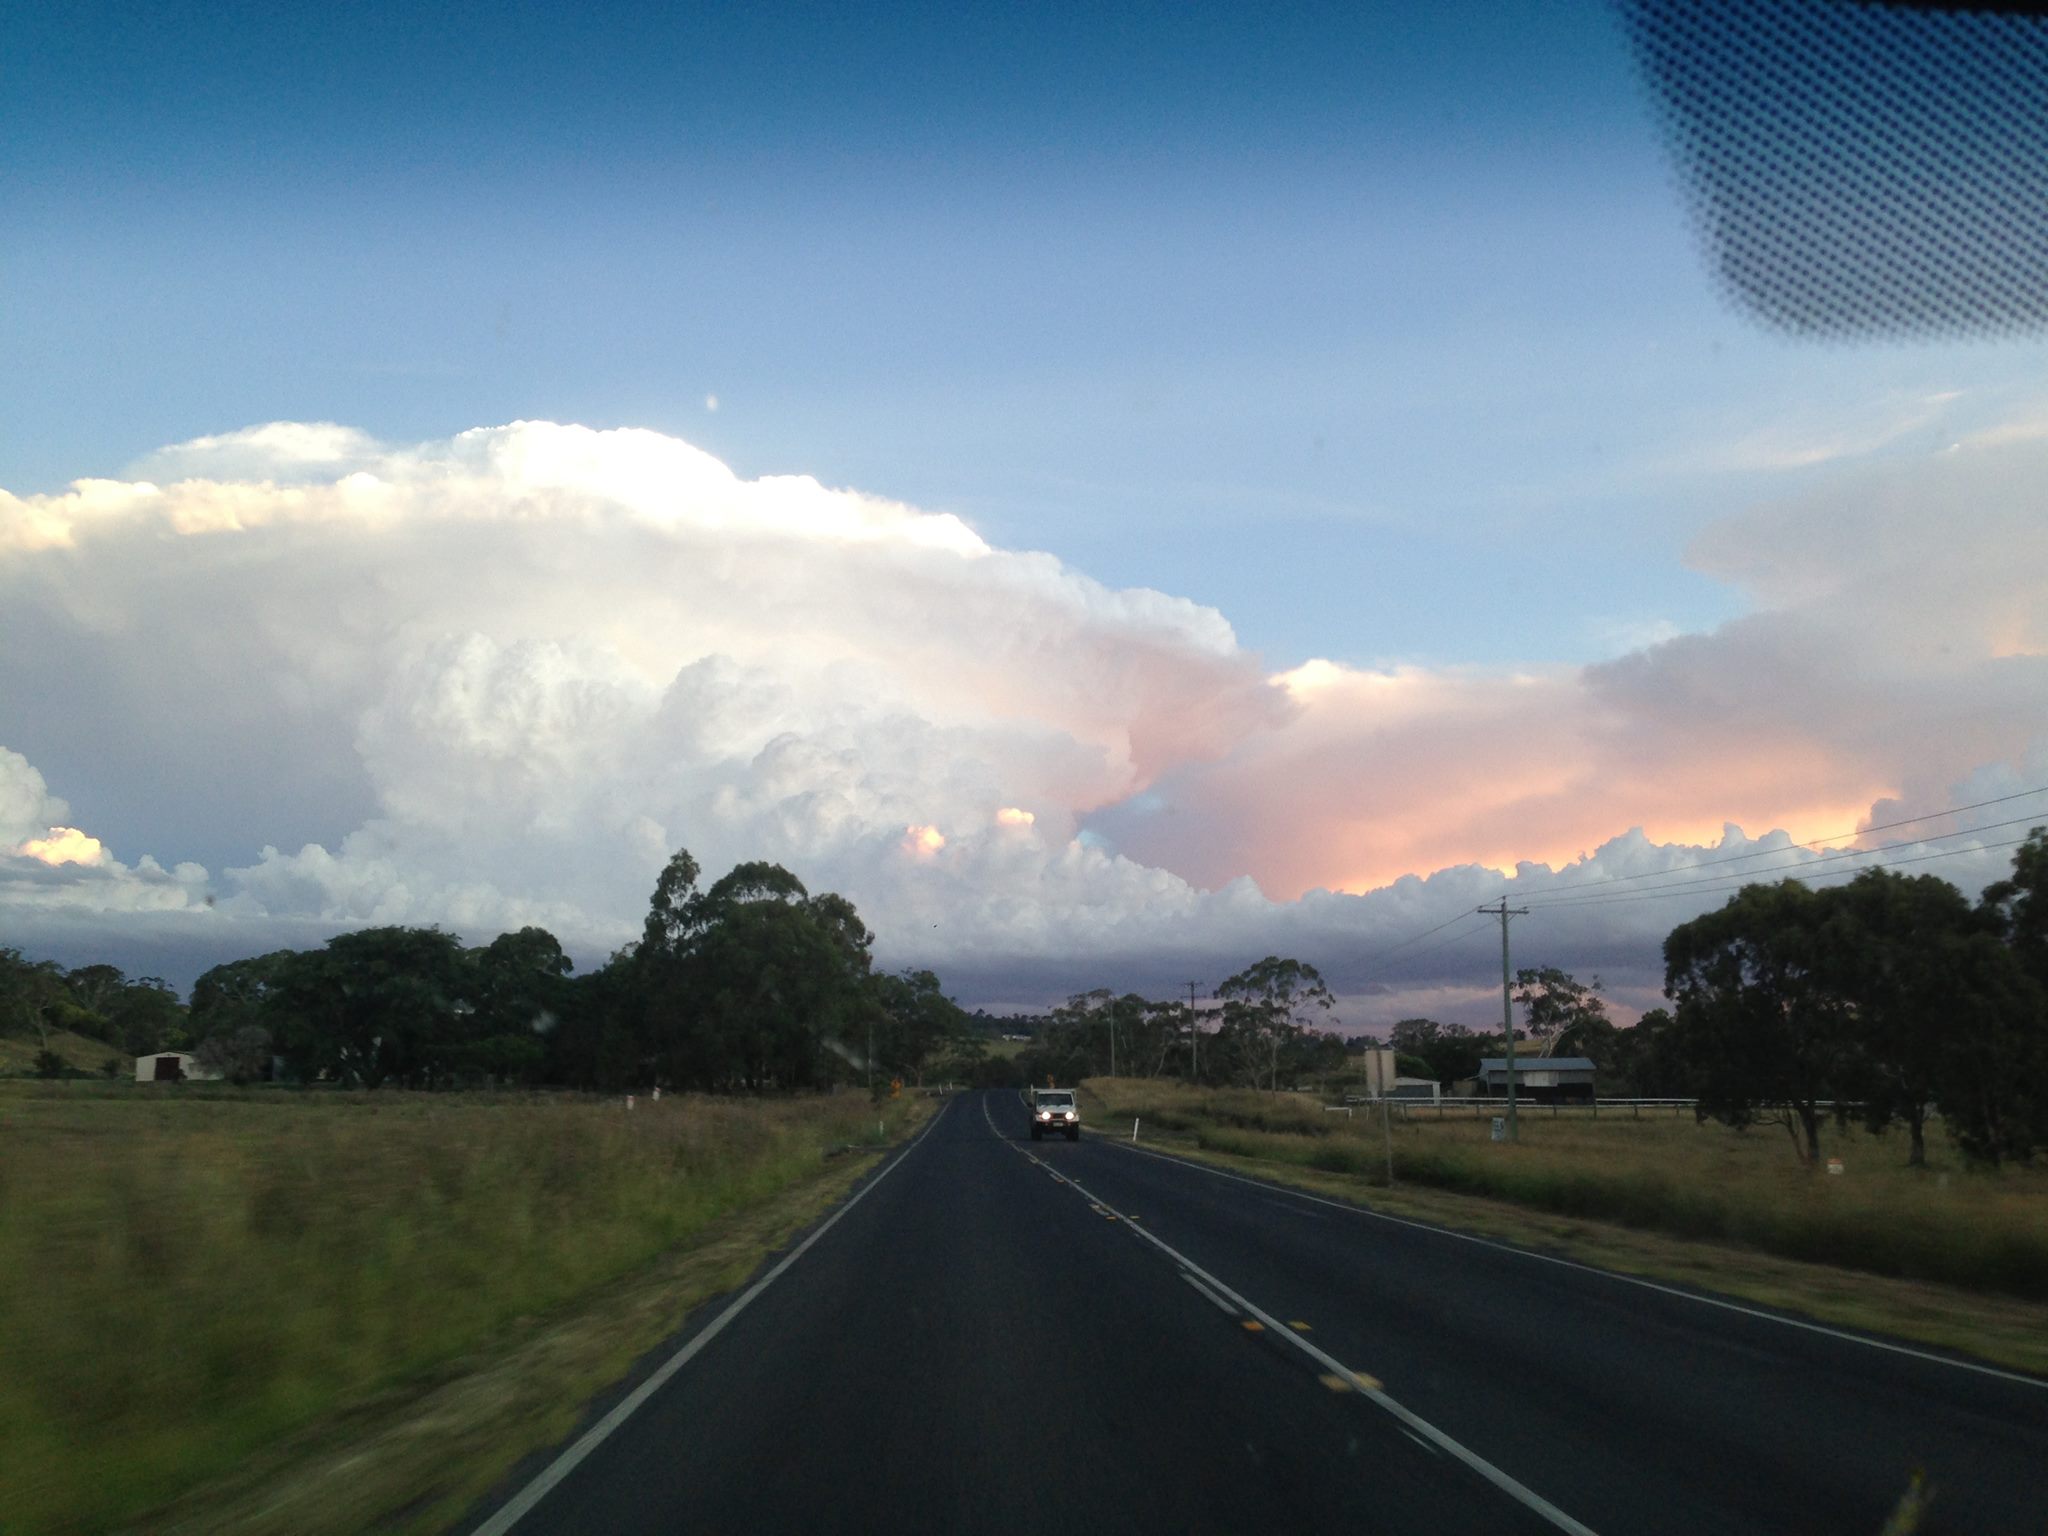 Toowoomba storm clouds, Toowoomba anvil clouds, Toowoomba storm, Toowoomba storm clouds january 23 2016, Toowoomba storm clouds pictures january 23 2016